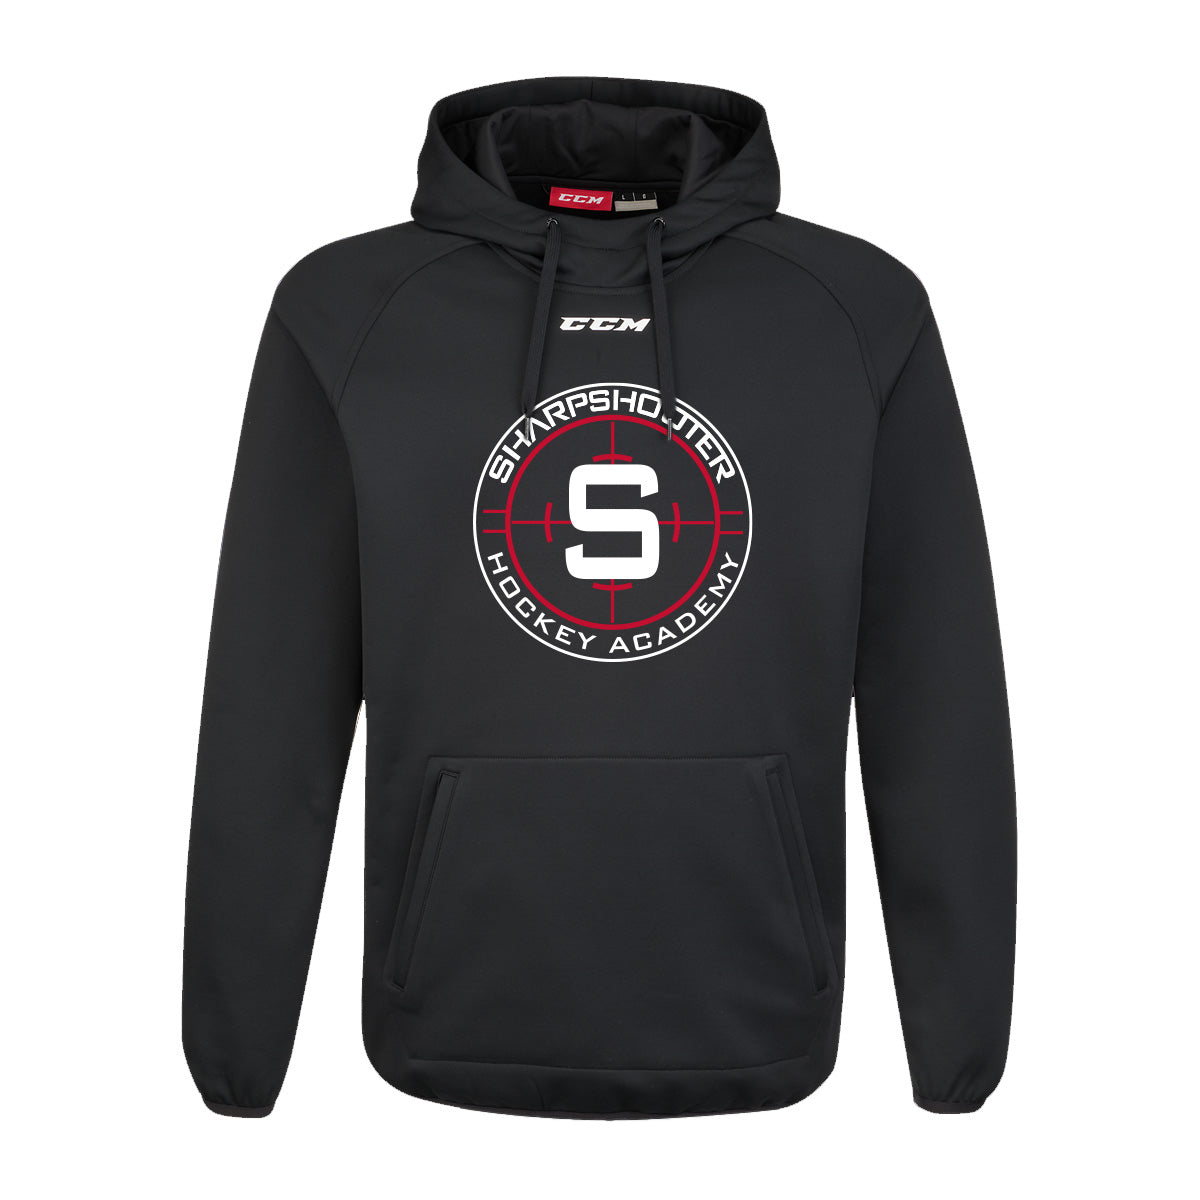 Sharpshooter -- Youth CCM Pullover Hoody